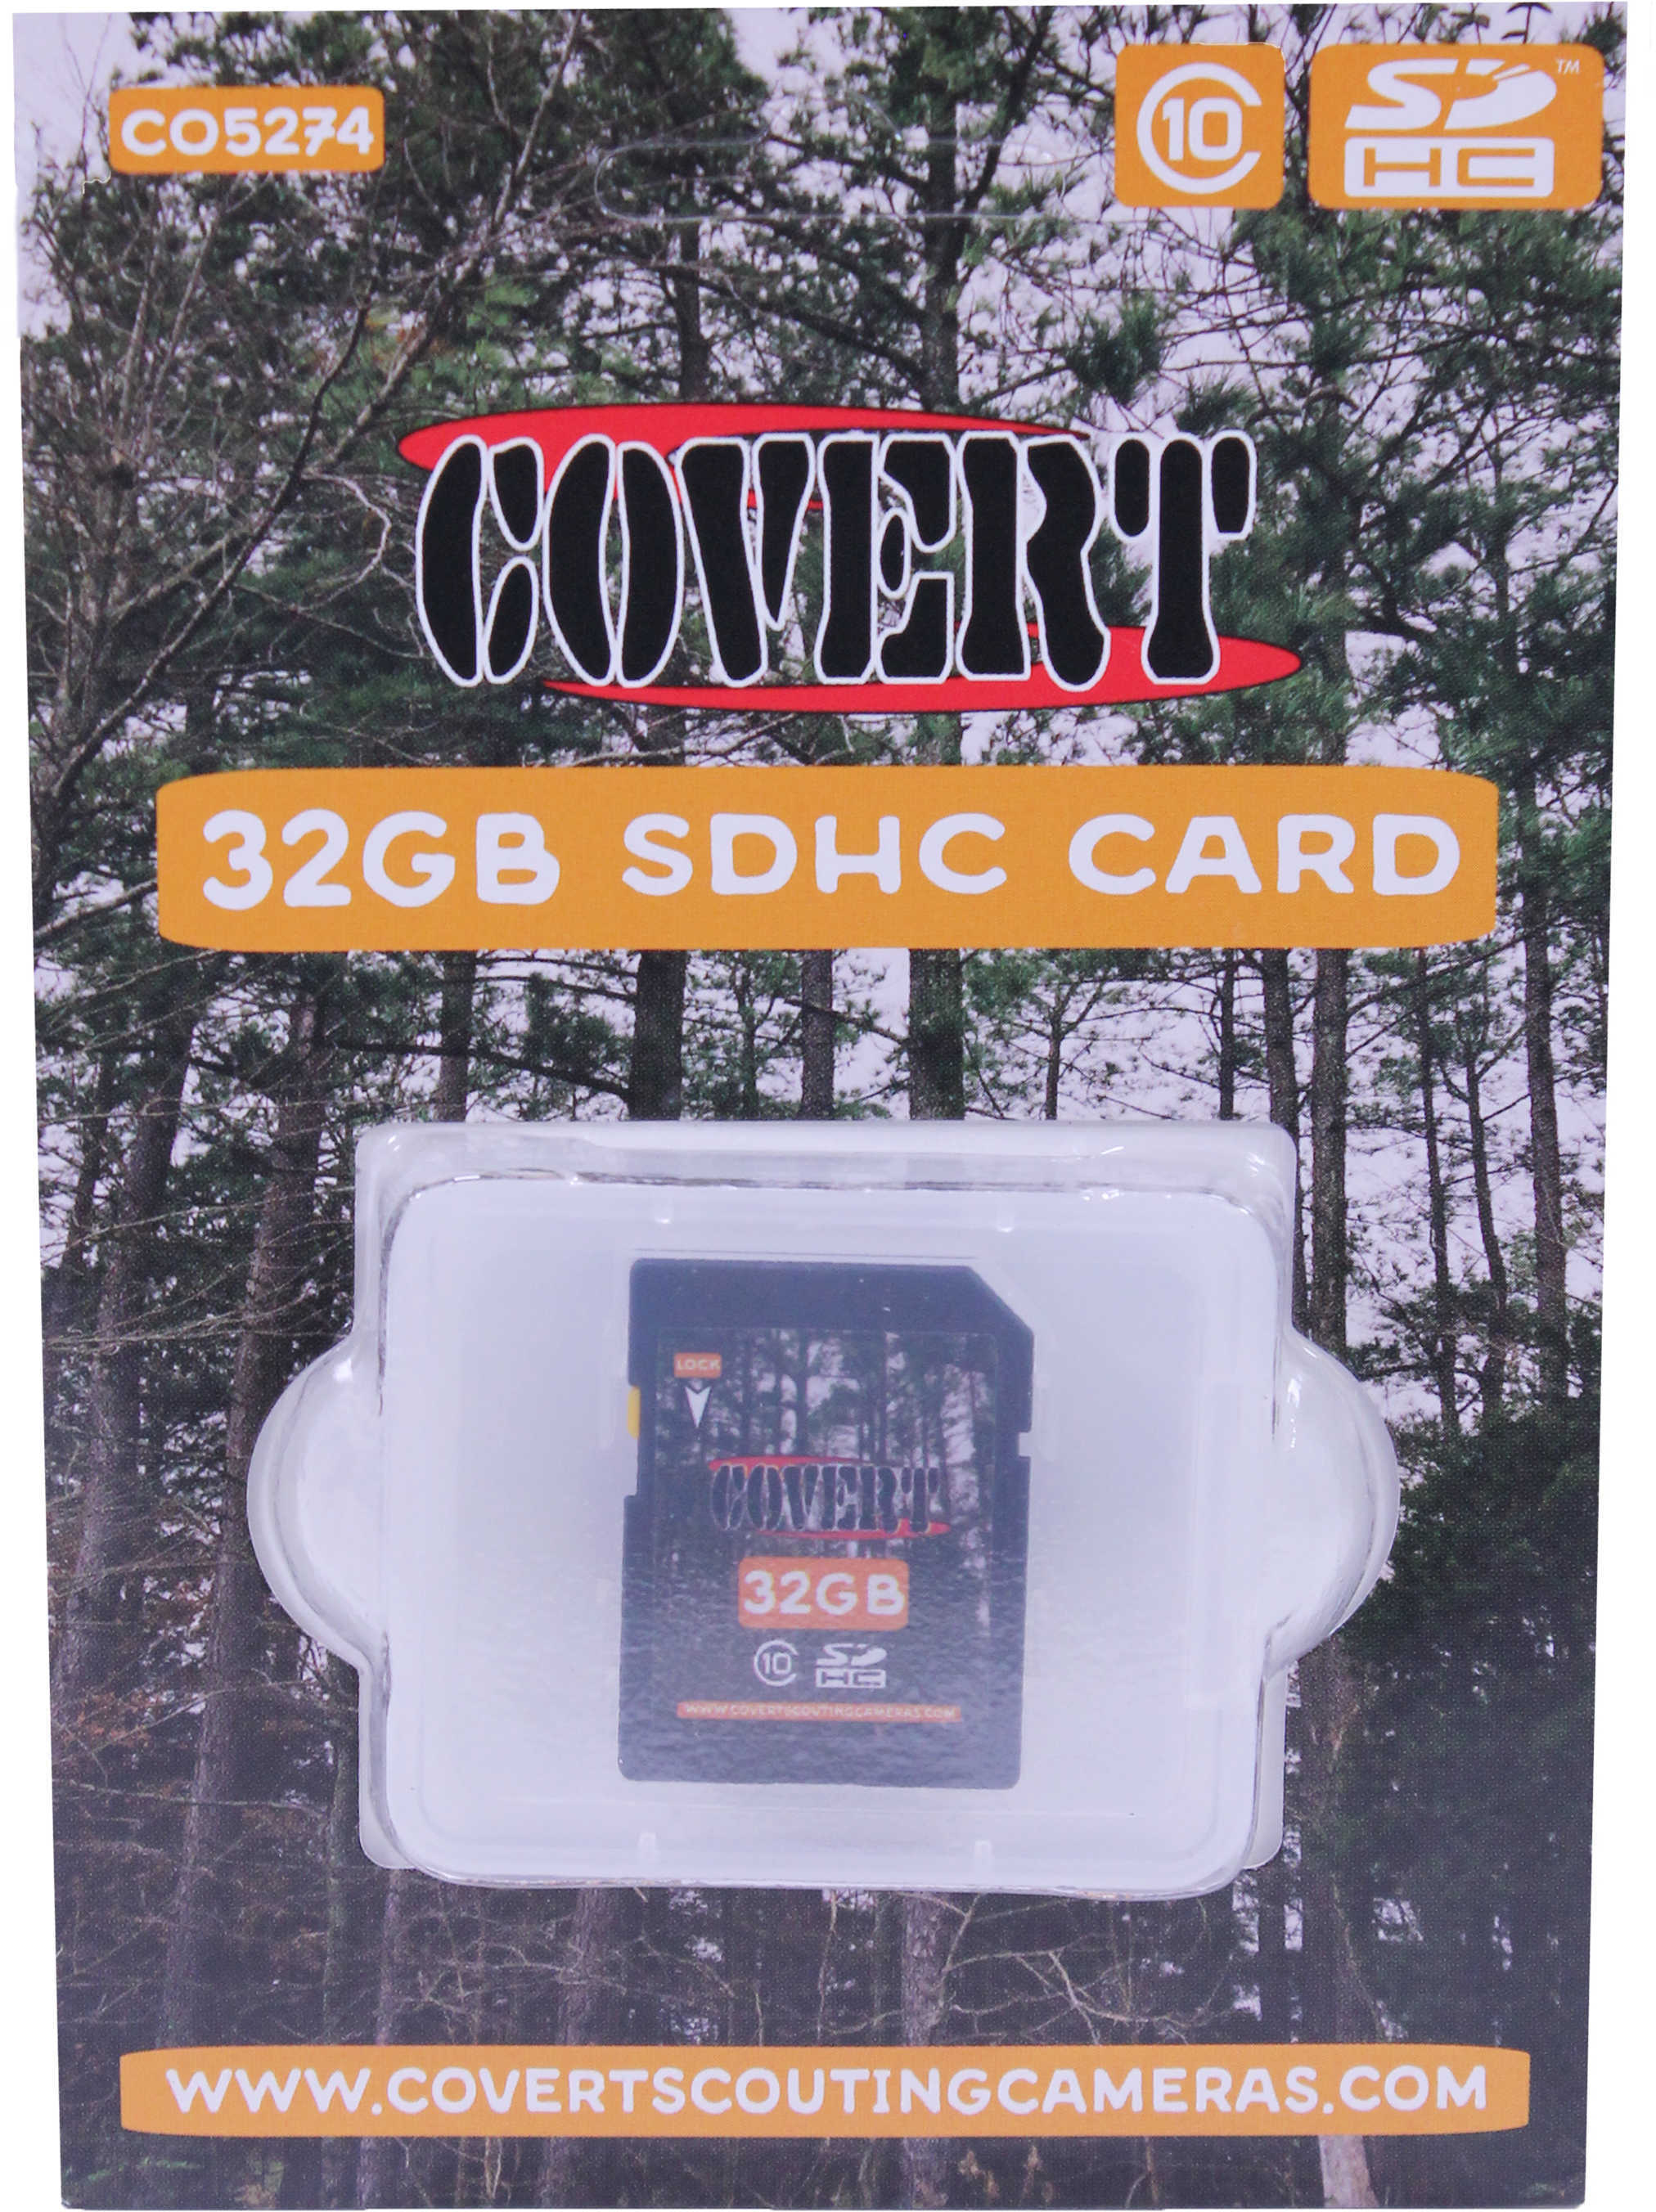 Covert Scouting Cameras 5274 Sd Memory Card 32Gb